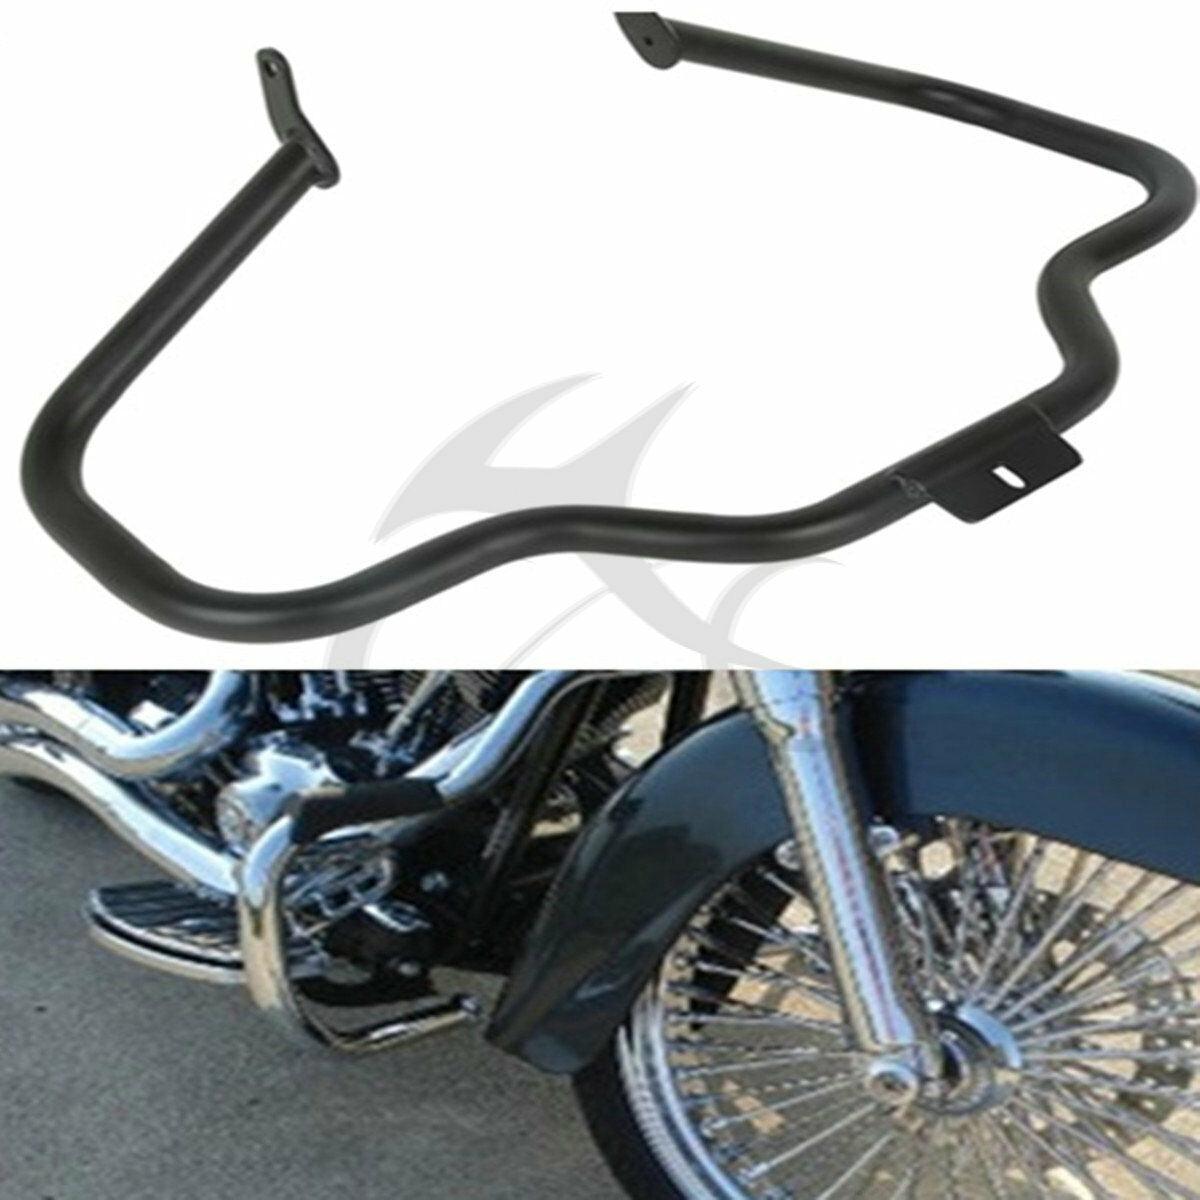 Matte Black Mustache Engine Guard Crash Bar Fit For Harley Softail Fat Boy 00-17 - Moto Life Products